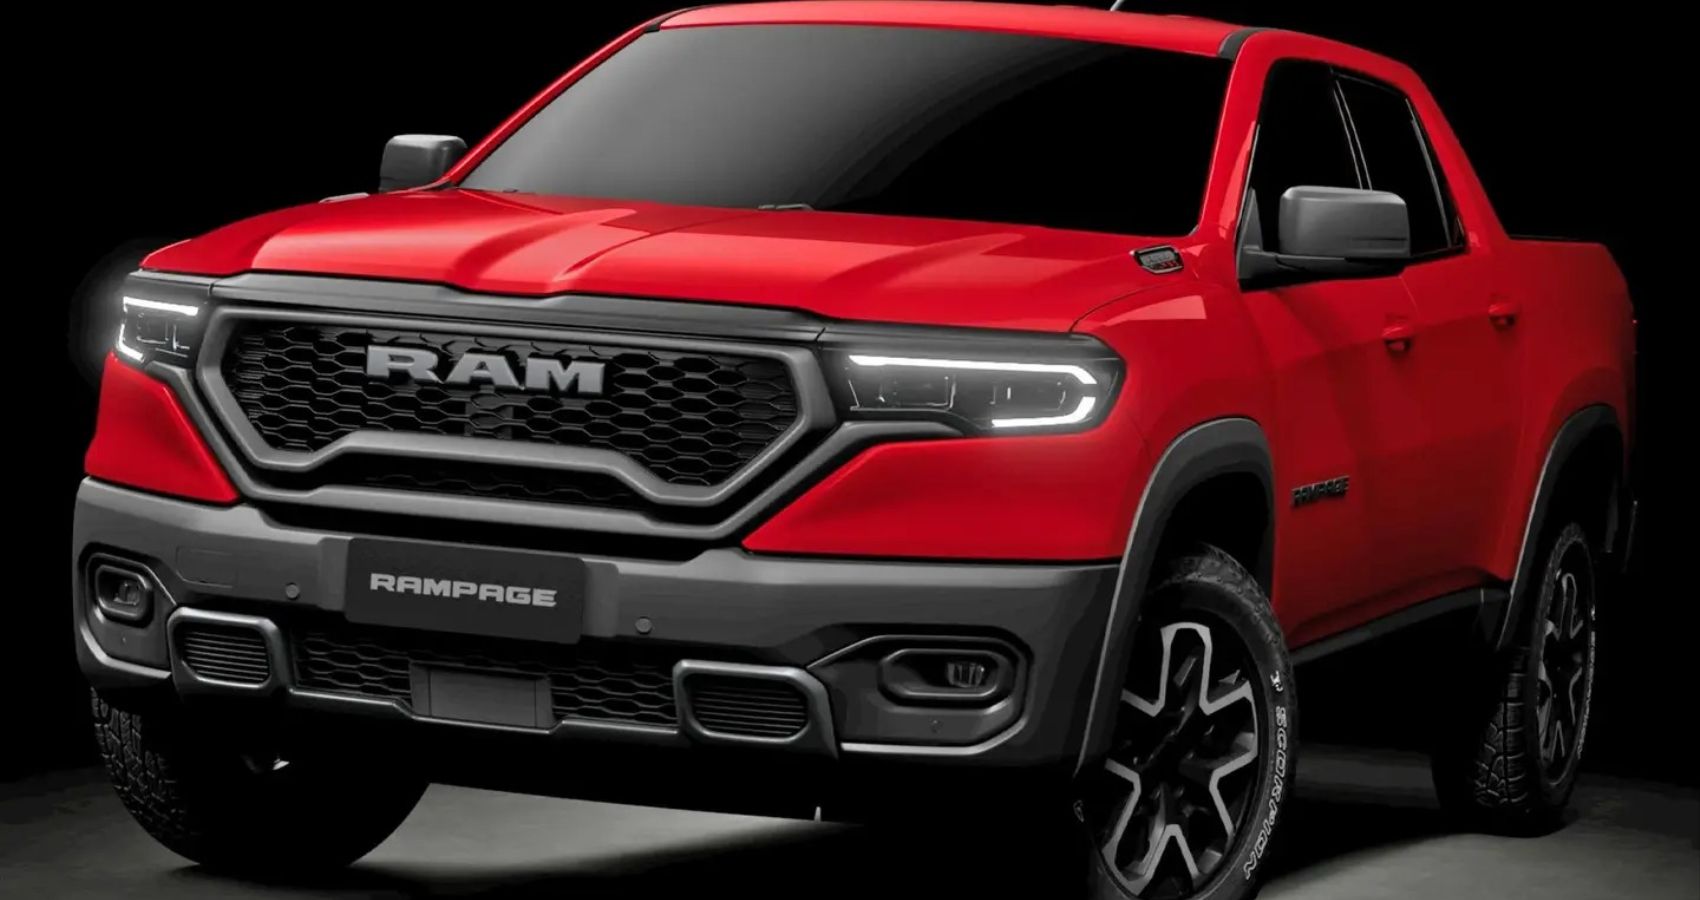 2024 Ram Rampage Compact Pickup Release Date, Expected Price, Specs